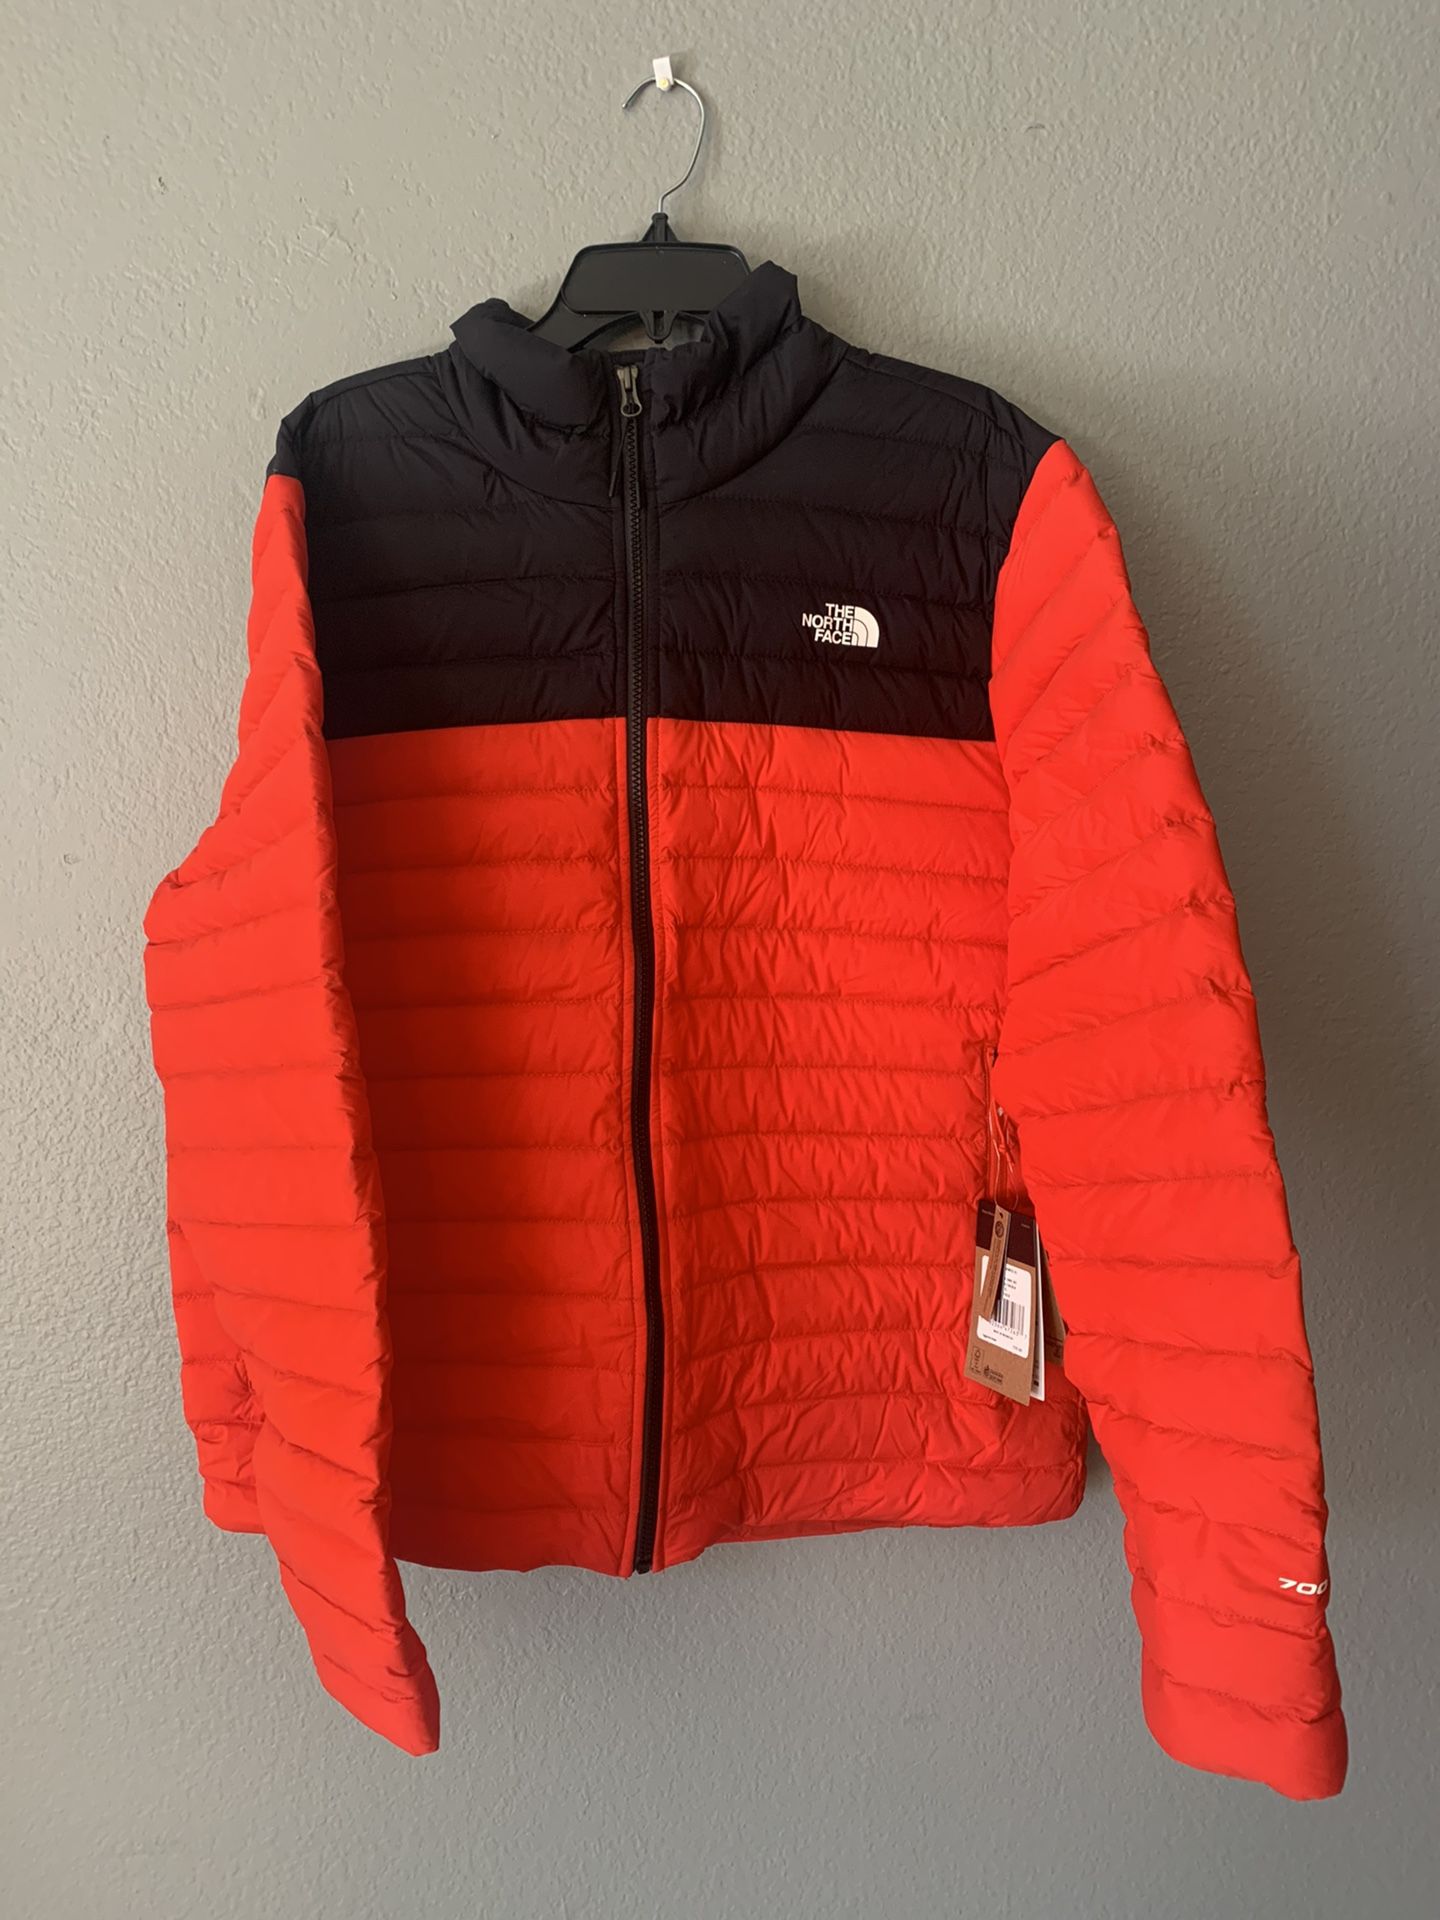 North face jacket RED